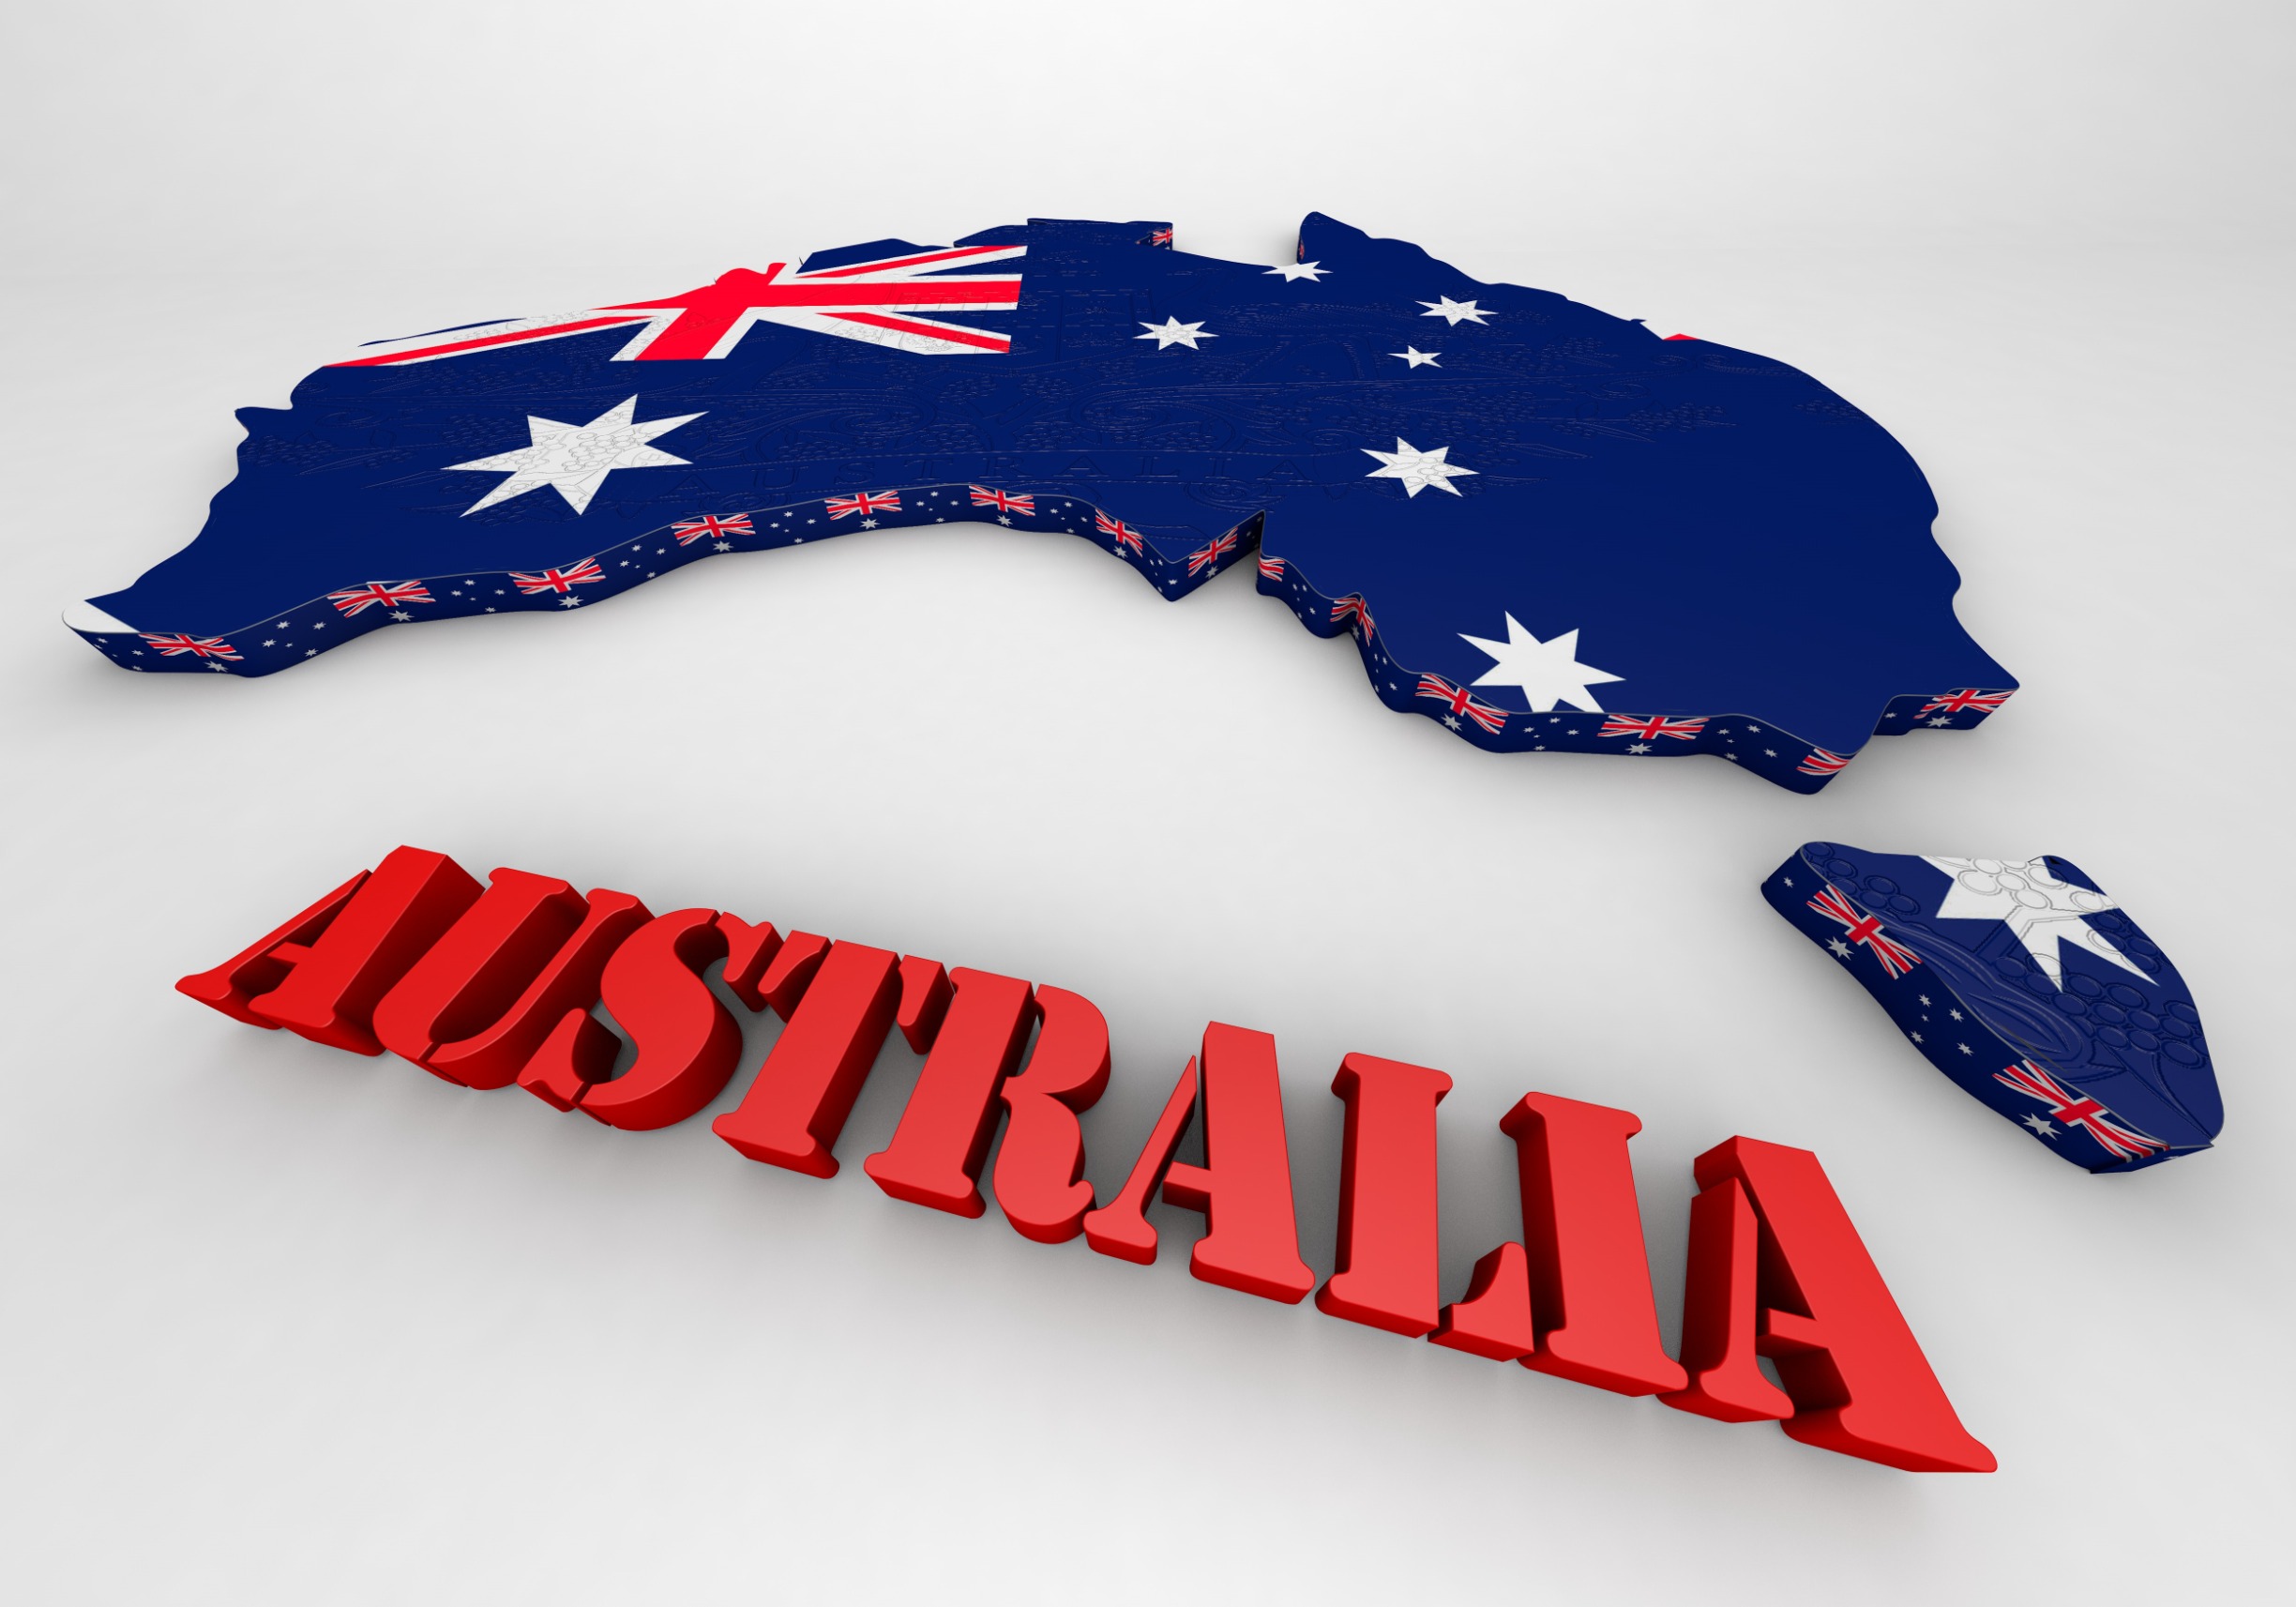 False Visa Claims in Australia: Facts, Penalties, and Prevention